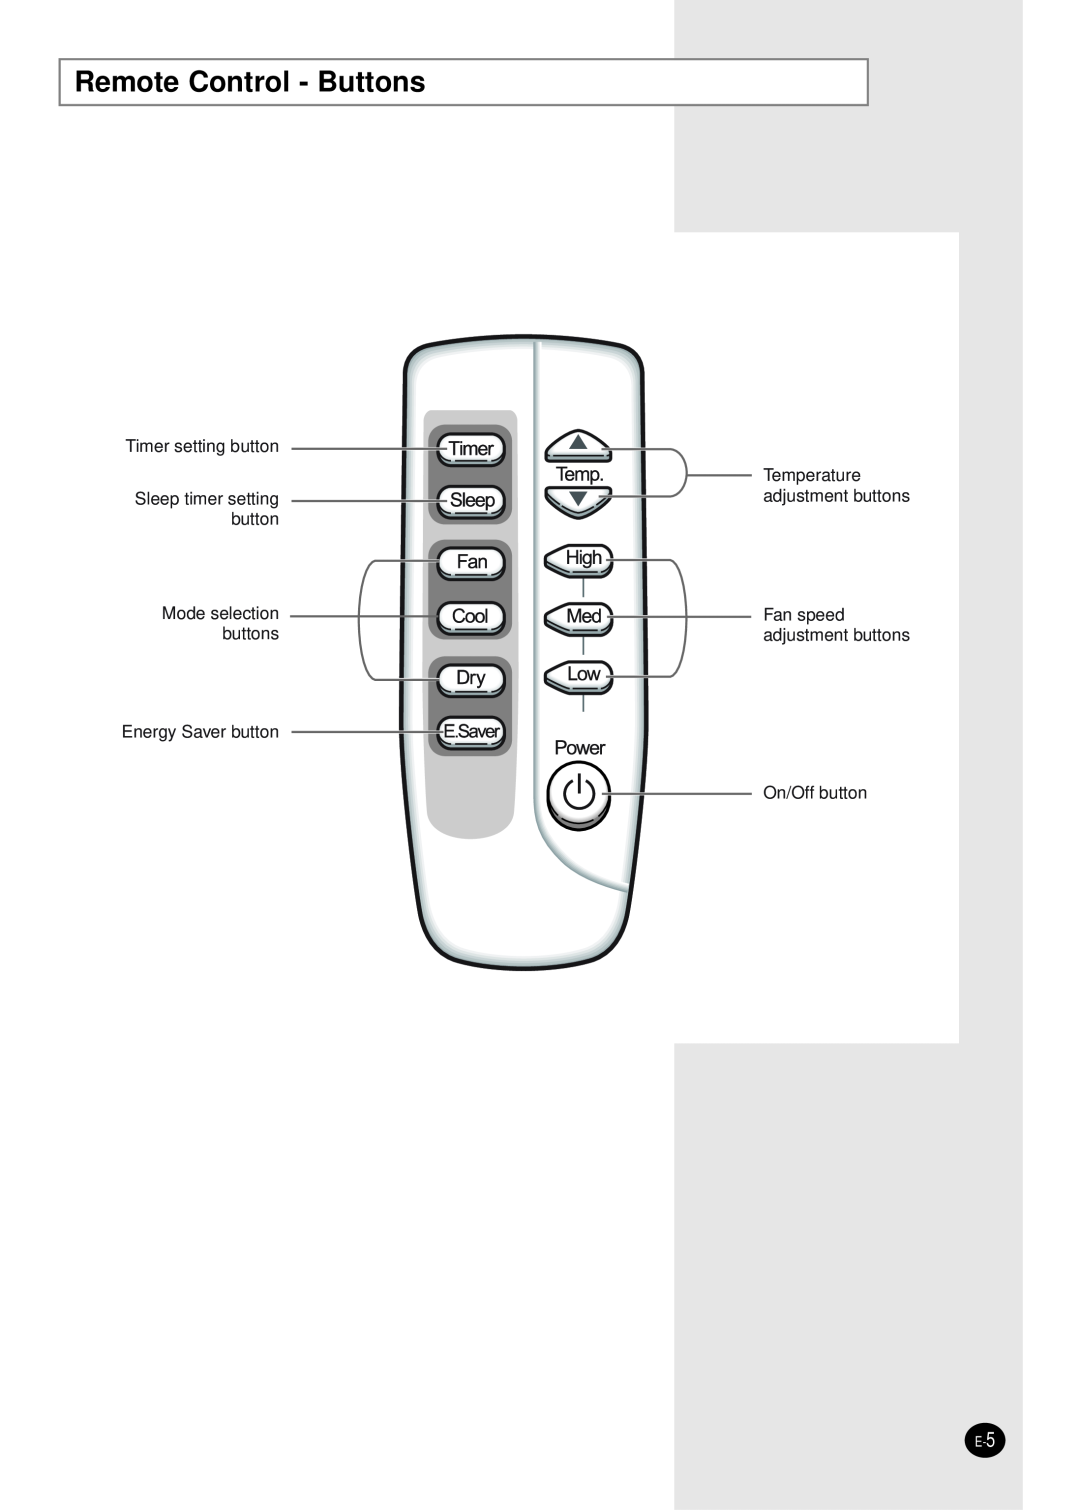 Samsung manual Remote Control - Buttons, Timer setting button Sleep timer setting button, Temperature adjustment buttons 